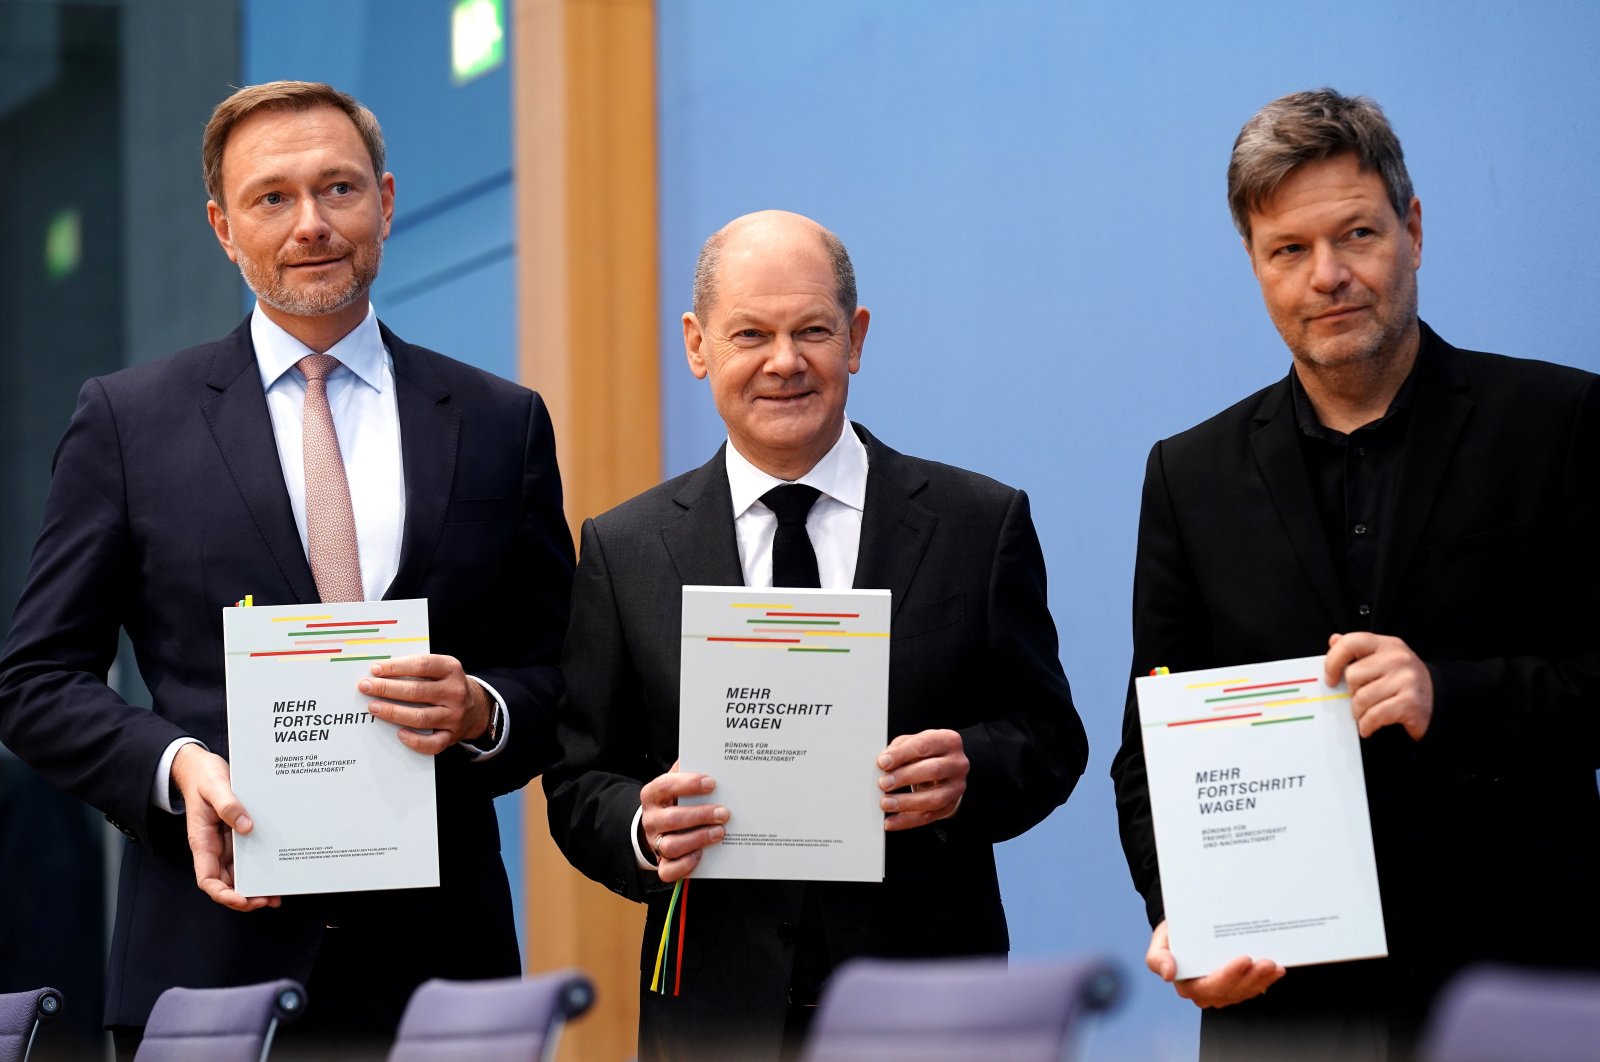 Designated Chancellor Olaf Scholz (C), designated German Minister of Finance Christian Lindner (L) and designated Minister for Economic Affairs and Climate Protection Robert Habeck (R) pose after signing the coalition agreement of Social Democratic Party (SPD), Green party (Die Gruenen) and Free Democratic Party (FDP) in Berlin, Germany, Dec. 7, 2021. (EPA Photo)